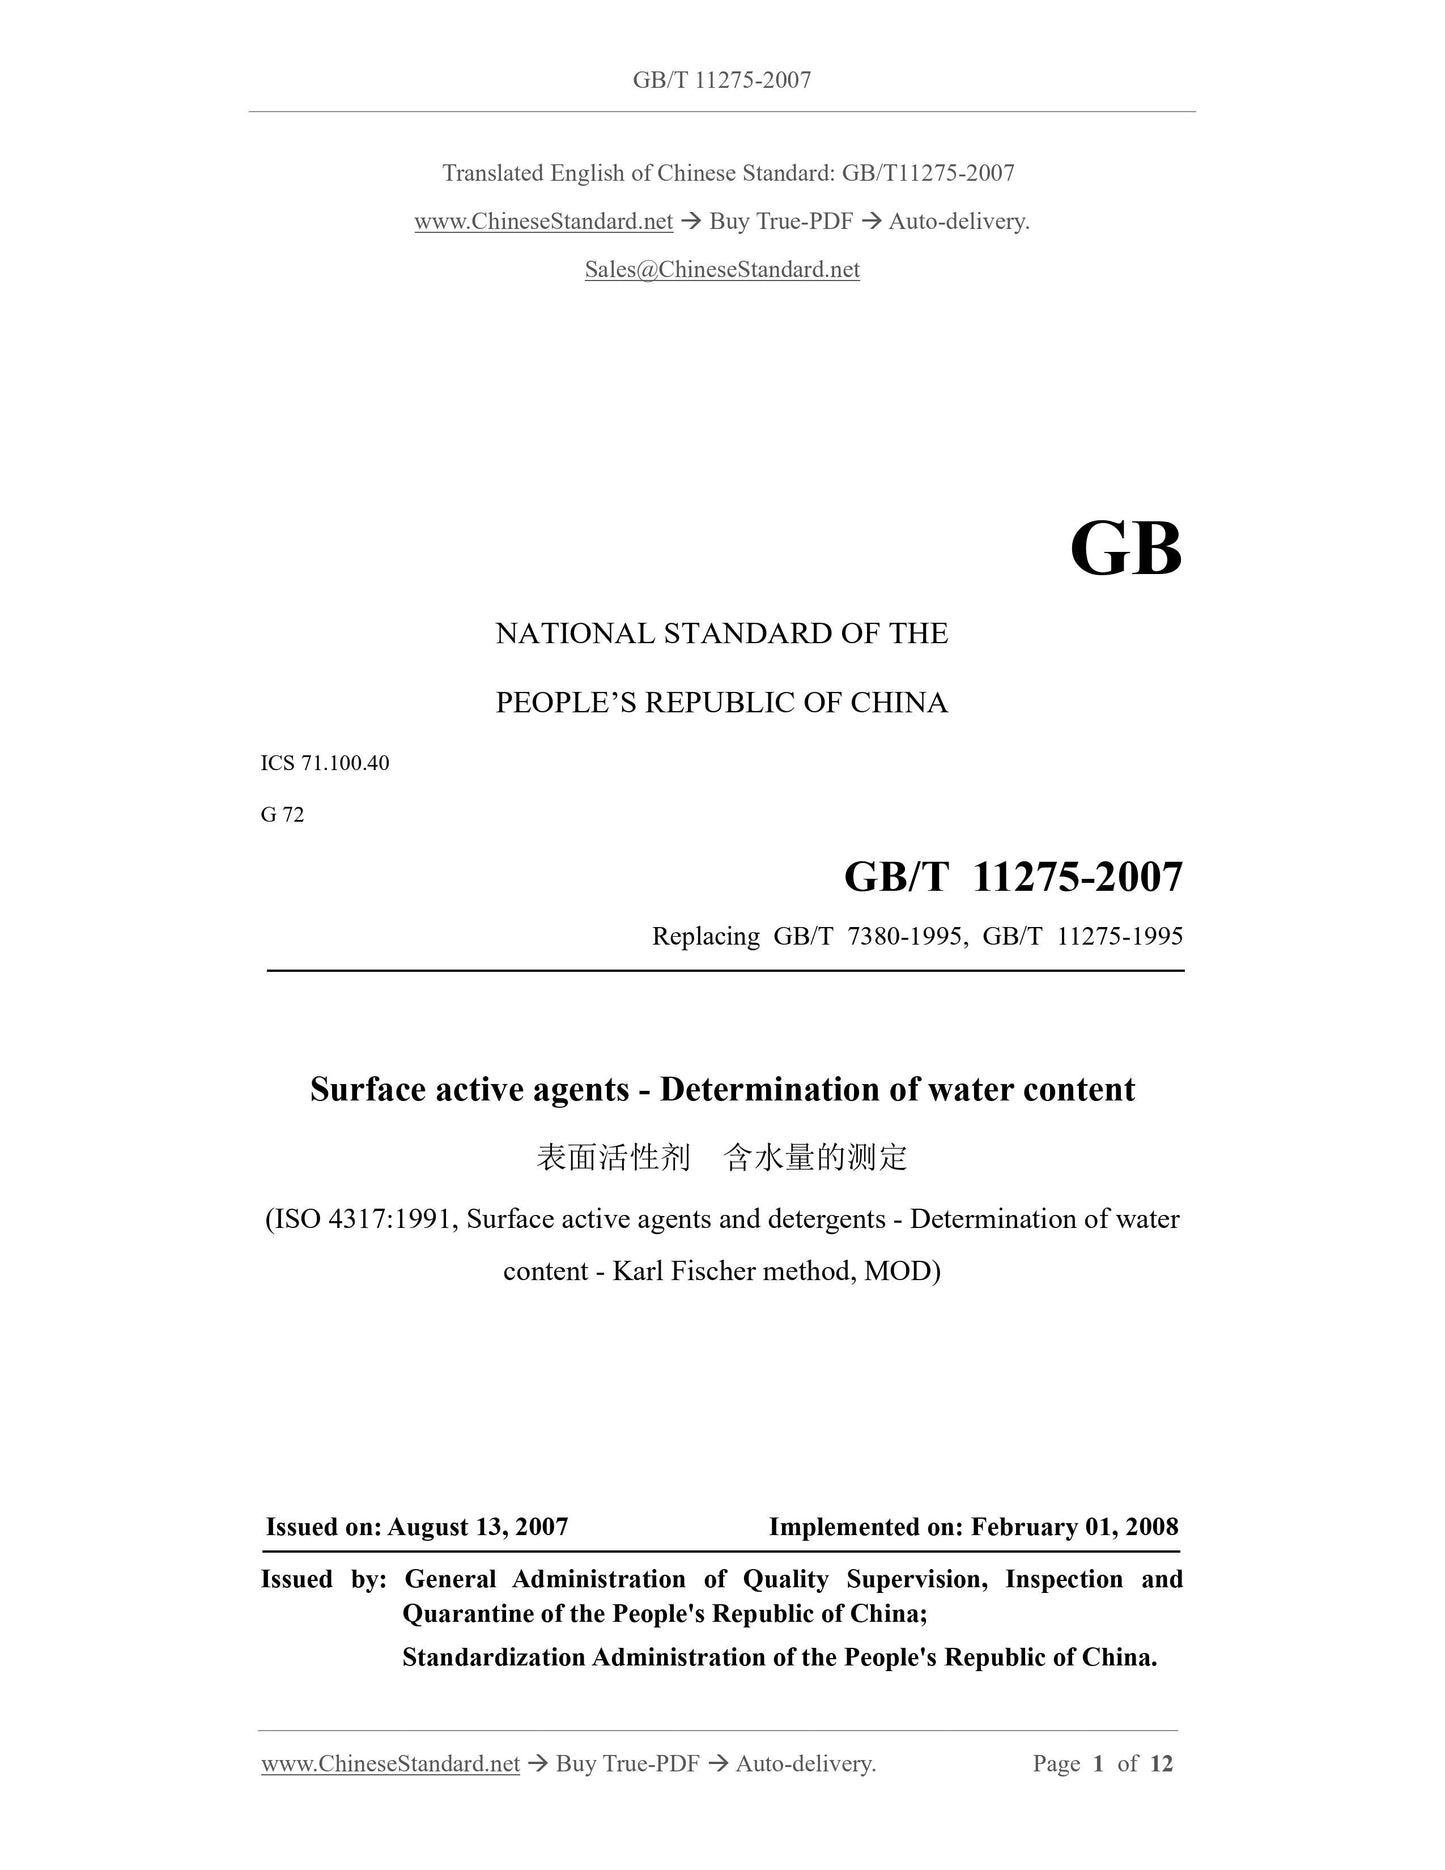 GB/T 11275-2007 Page 1